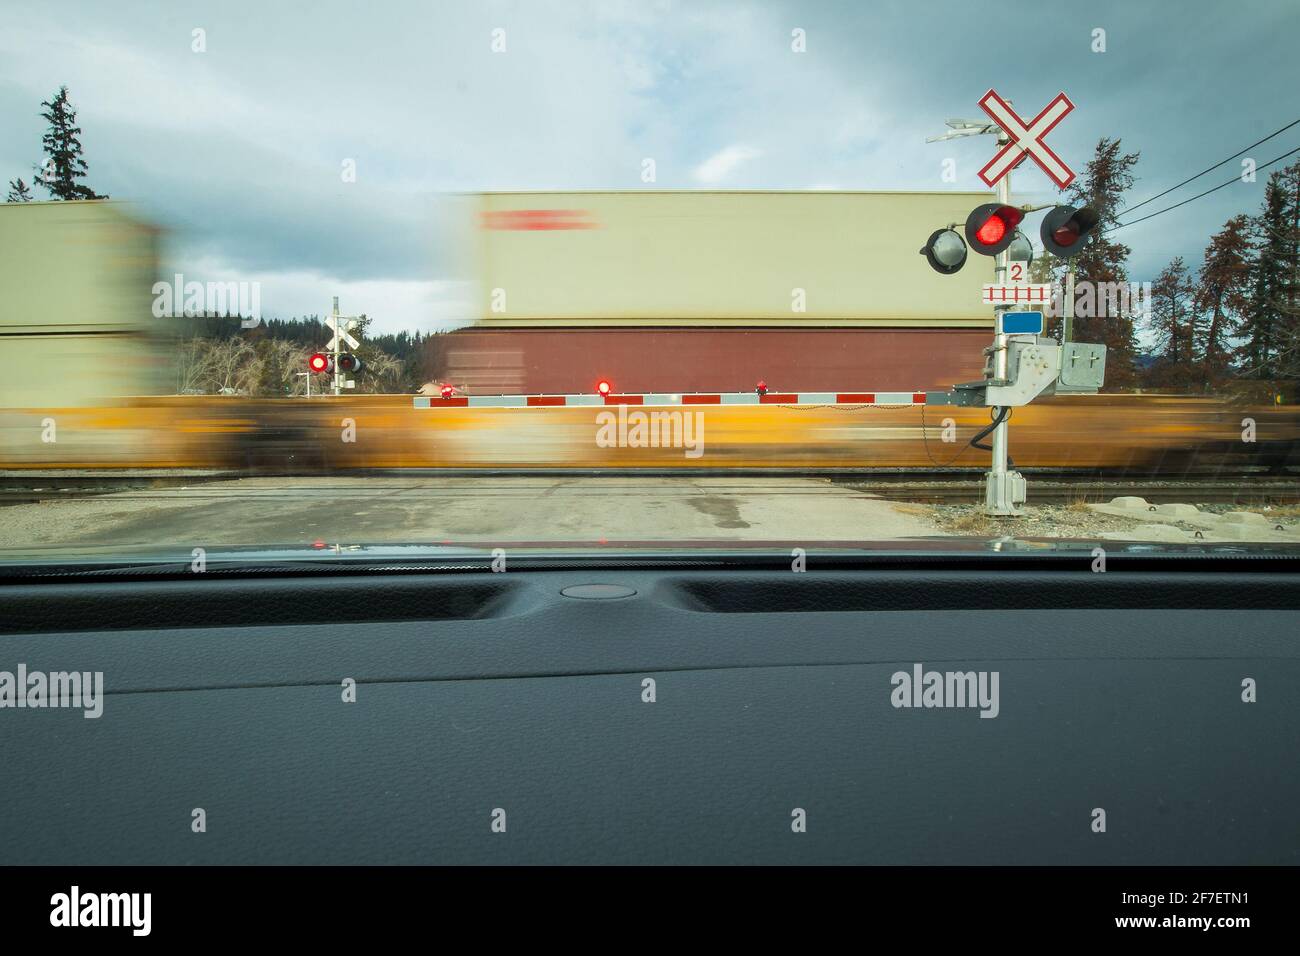 Grade crossing with heavy train loaded with containers in america. Train moving past the crossing in motion blur while lights are flashing Stock Photo